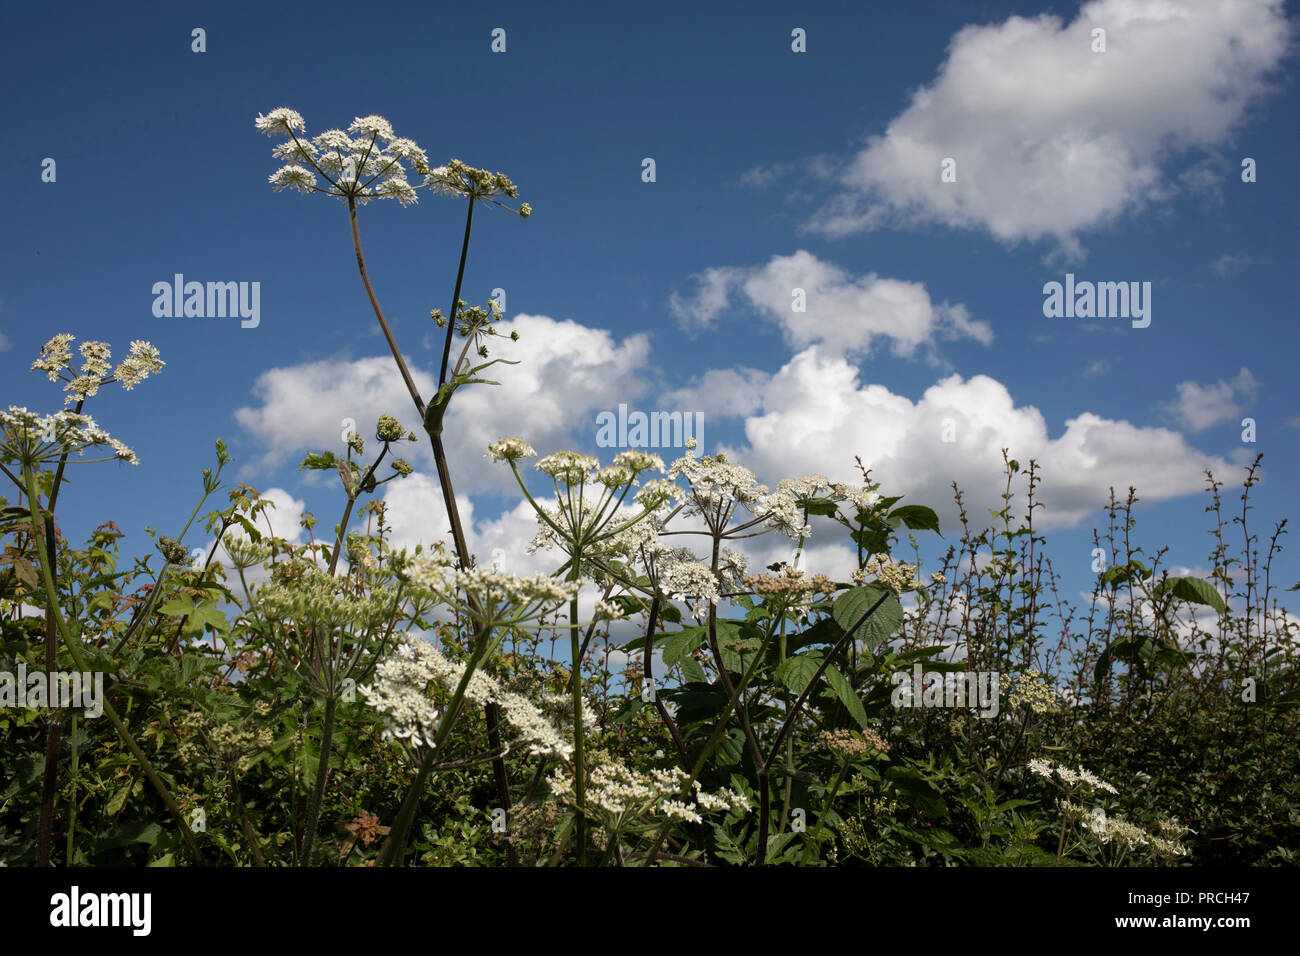 Nature of the ground and sky with Cow Parsley reaching for the clouds in Himbleton, United Kingdom. Anthriscus sylvestris, known as cow parsley, wild chervil, wild beaked parsley, or keck is a herbaceous biennial or short-lived perennial plant in the family Apiaceae, genus Anthriscus. Stock Photo